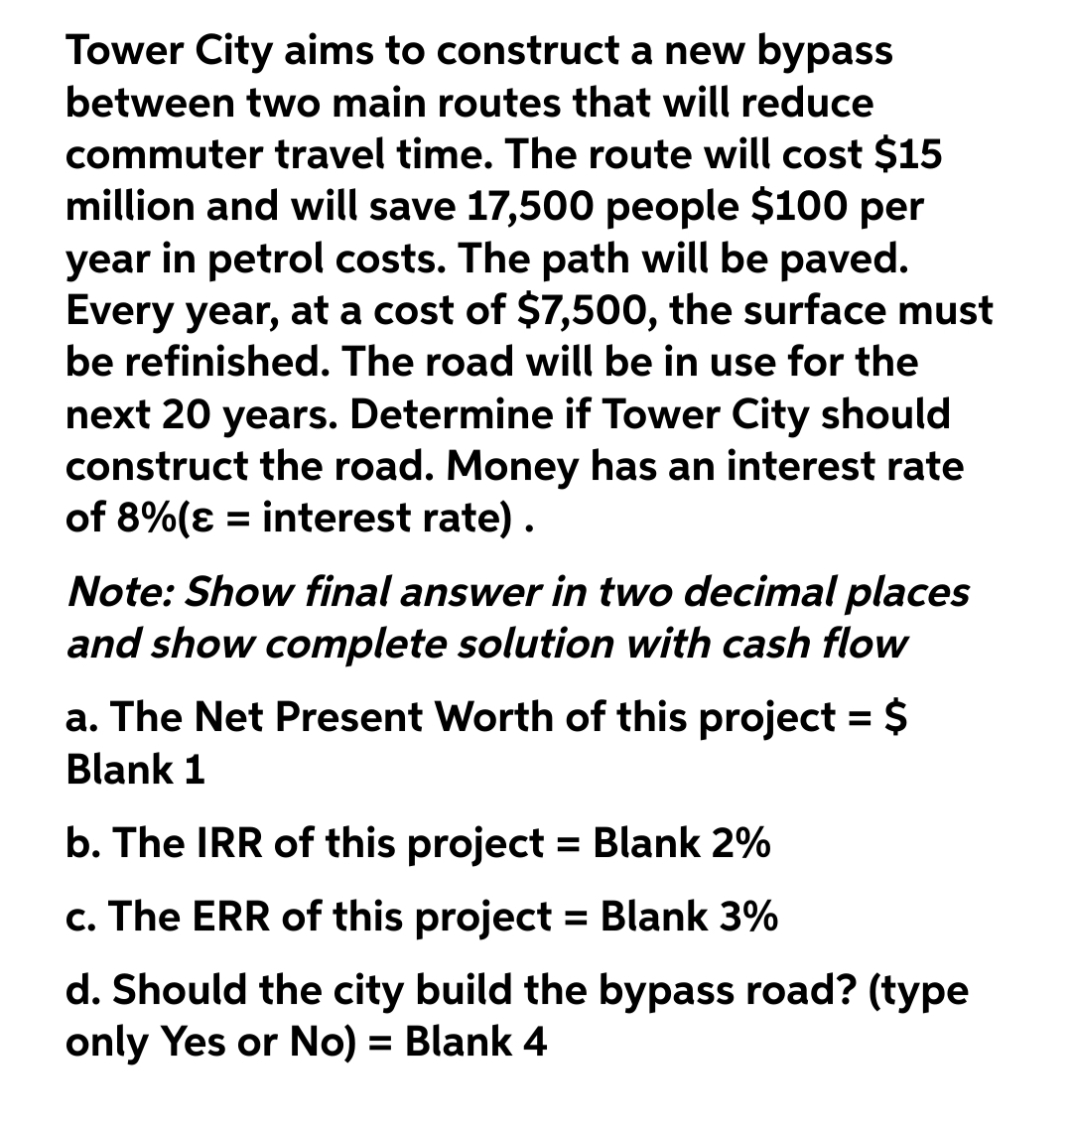 Tower City aims to construct a new bypass
between two main routes that will reduce
commuter travel time. The route will cost $15
million and will save 17,500 people $100 per
year in petrol costs. The path will be paved.
Every year, at a cost of $7,500, the surface must
be refinished. The road will be in use for the
next 20 years. Determine if Tower City should
construct the road. Money has an interest rate
of 8%(ɛ = interest rate) .
Note: Show final answer in two decimal places
and show complete solution with cash flow
a. The Net Present Worth of this project = $
Blank 1
b. The IRR of this project = Blank 2%
c. The ERR of this project = Blank 3%
%3D
d. Should the city build the bypass road? (type
only Yes or No) = Blank 4
%3D
